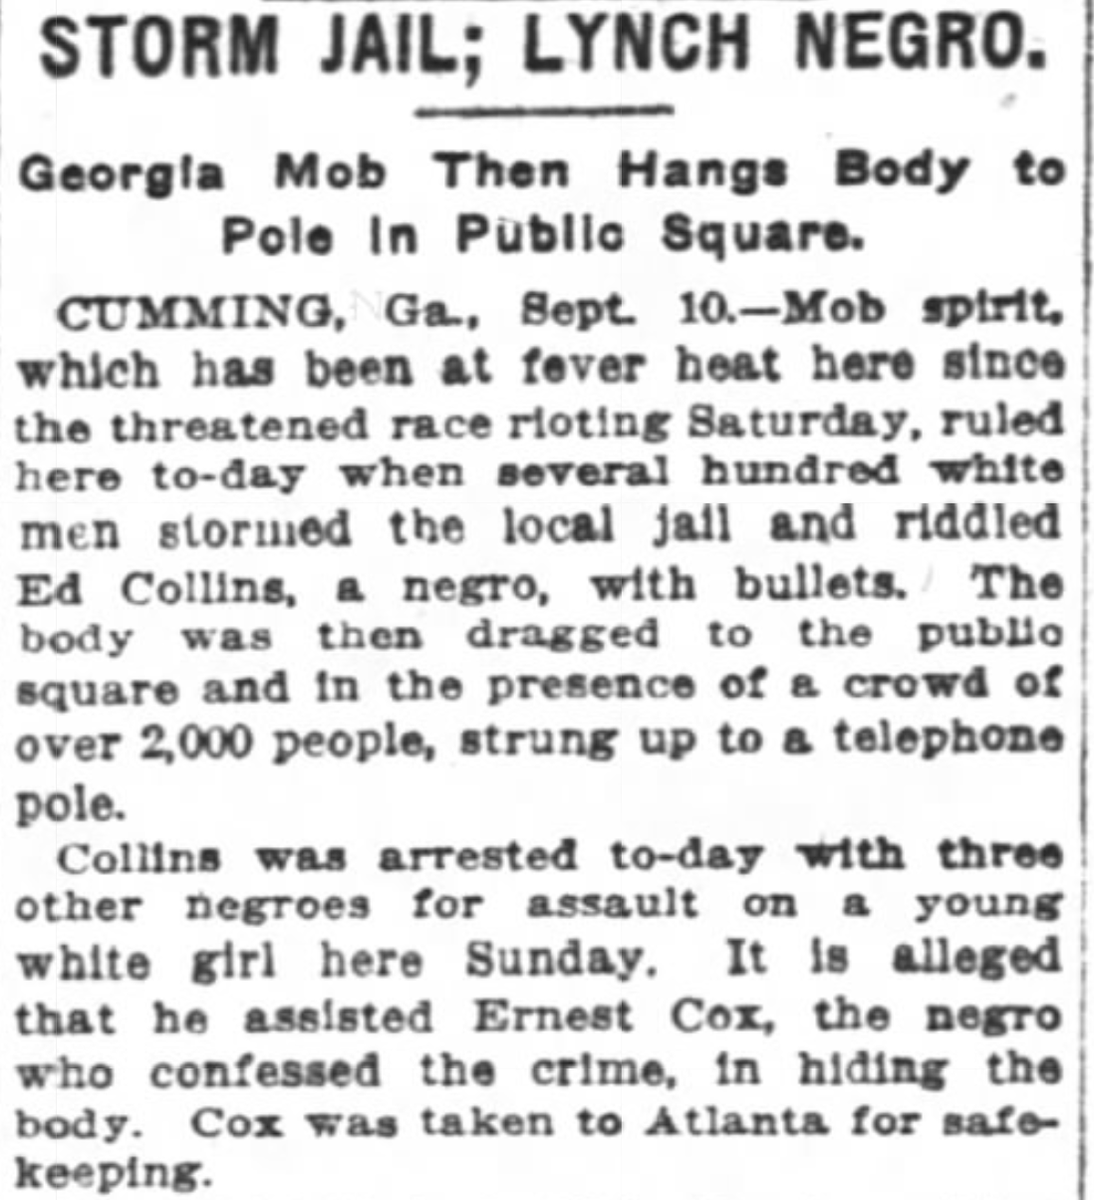 Three more Black teens and a neighbor were arrested: Oscar Daniel, Jane Daniel, Rob Edwards, + Ed Collins. Later that day, up to 4,000 people attacked the county jail. They killed/lynched Edwards, but his body was so mutilated that the newspapers kept saying it was Ed Collins.